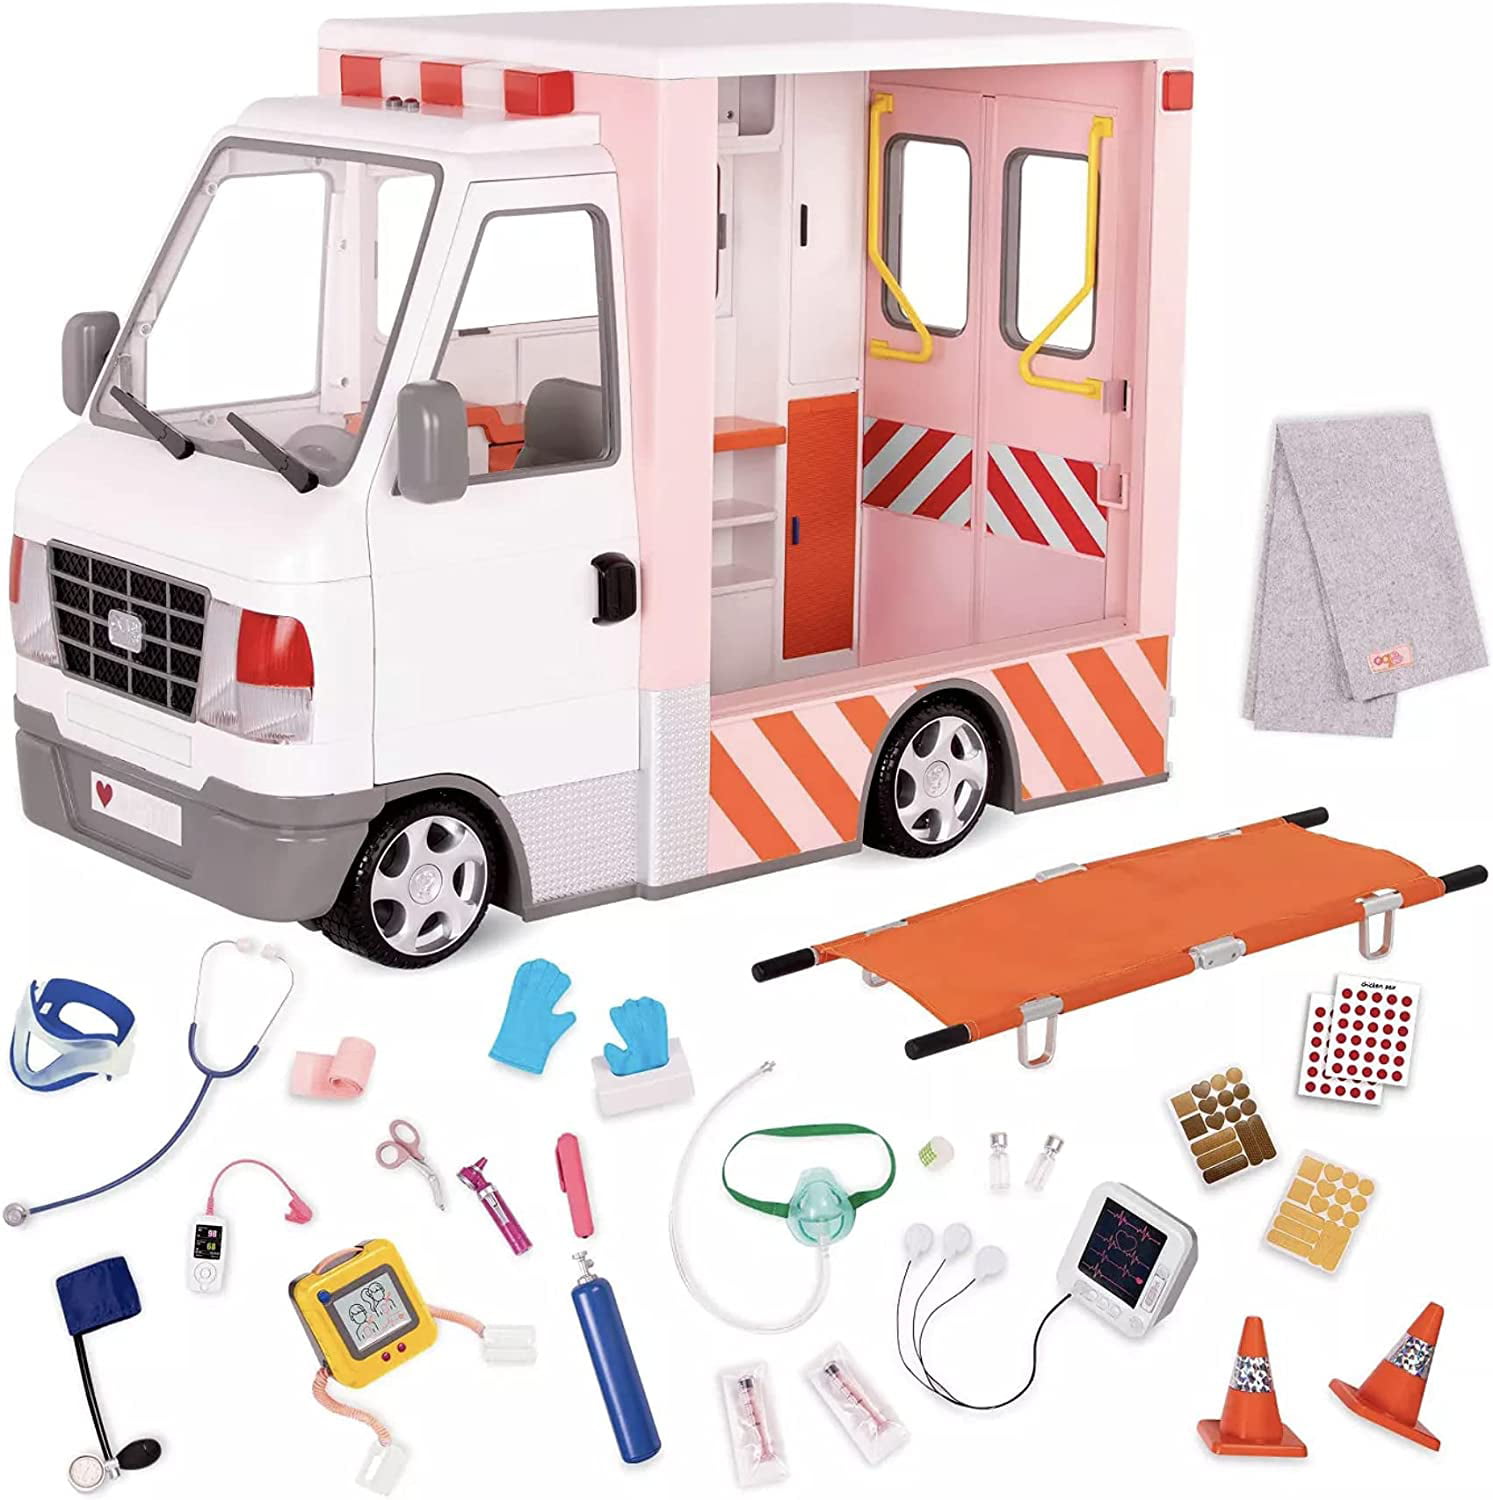 Teasing embargo Enumerate Our Generation Rescue Ambulance Playset with Electronics for 18" Dolls -  Walmart.com